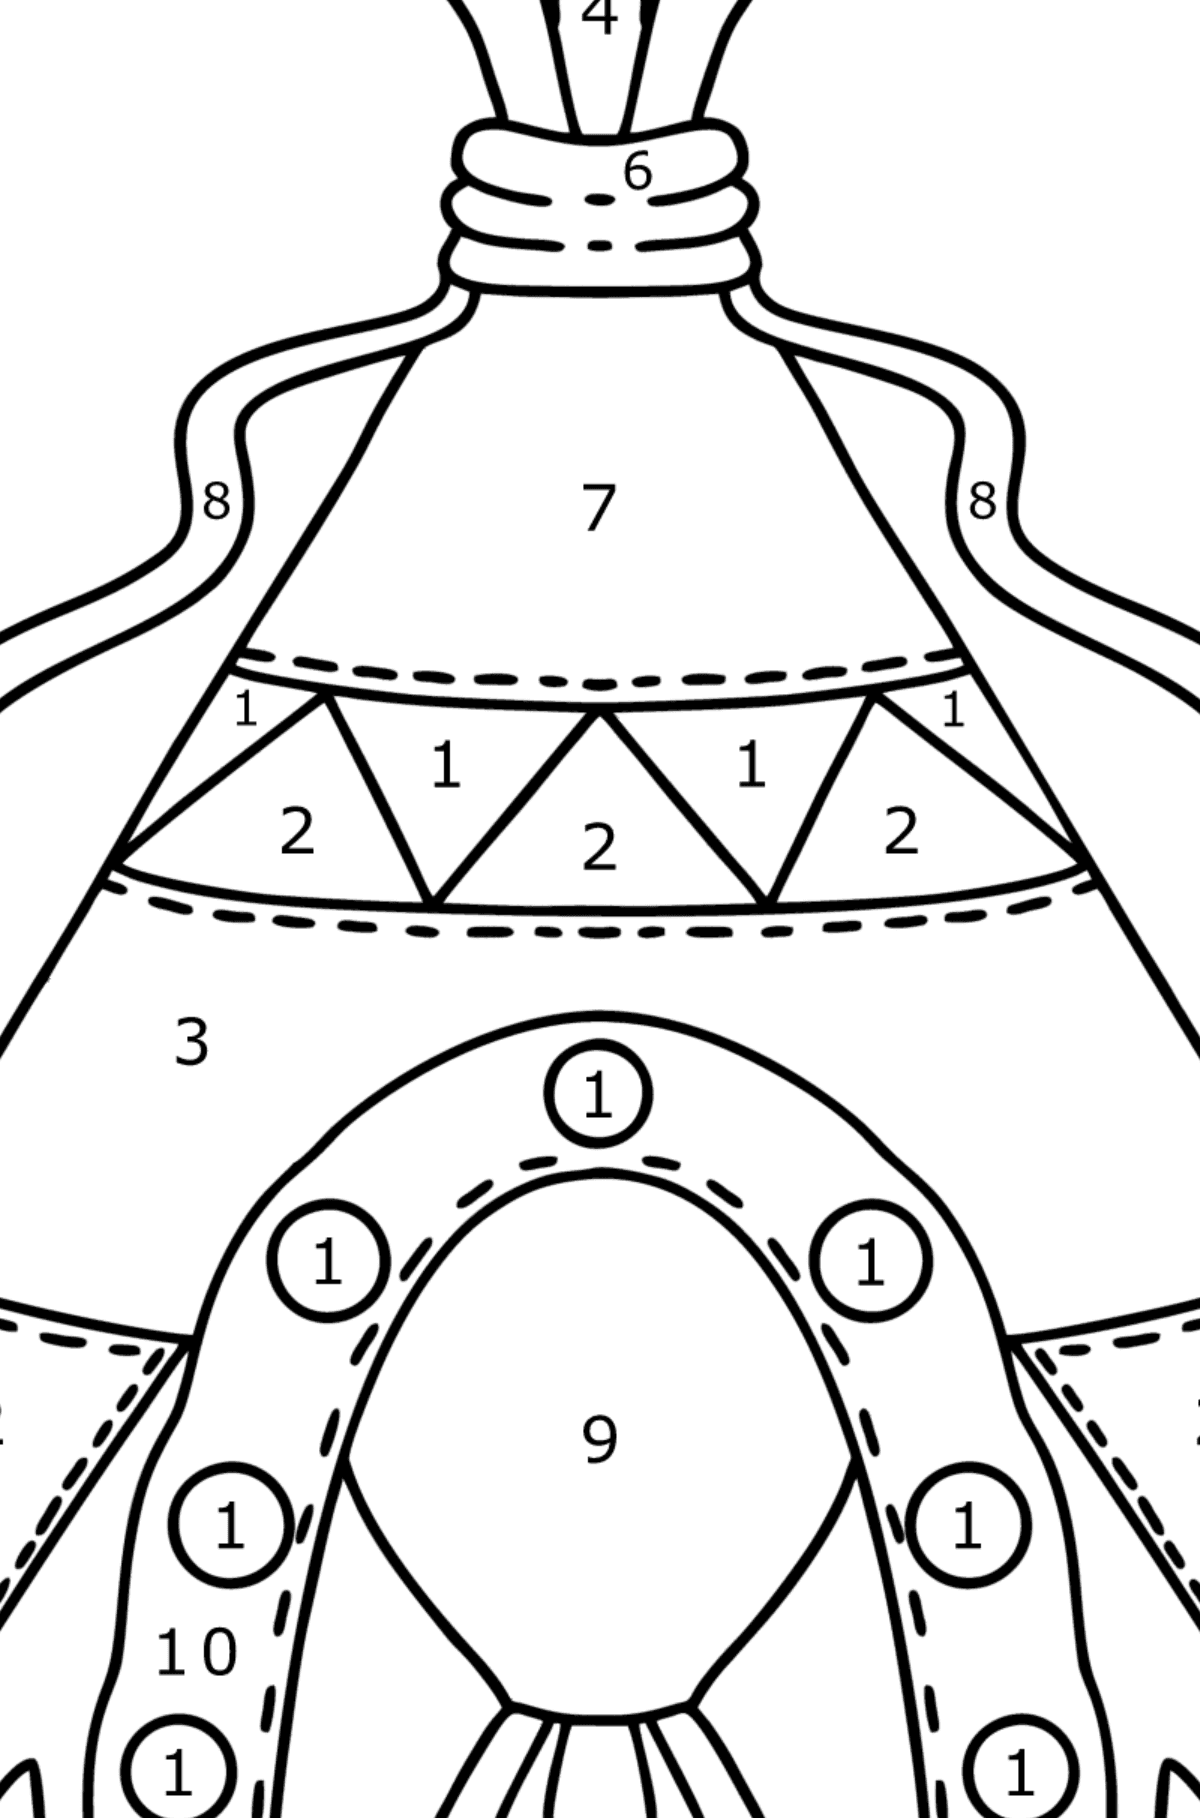 Tepee coloring page - Coloring by Numbers for Kids